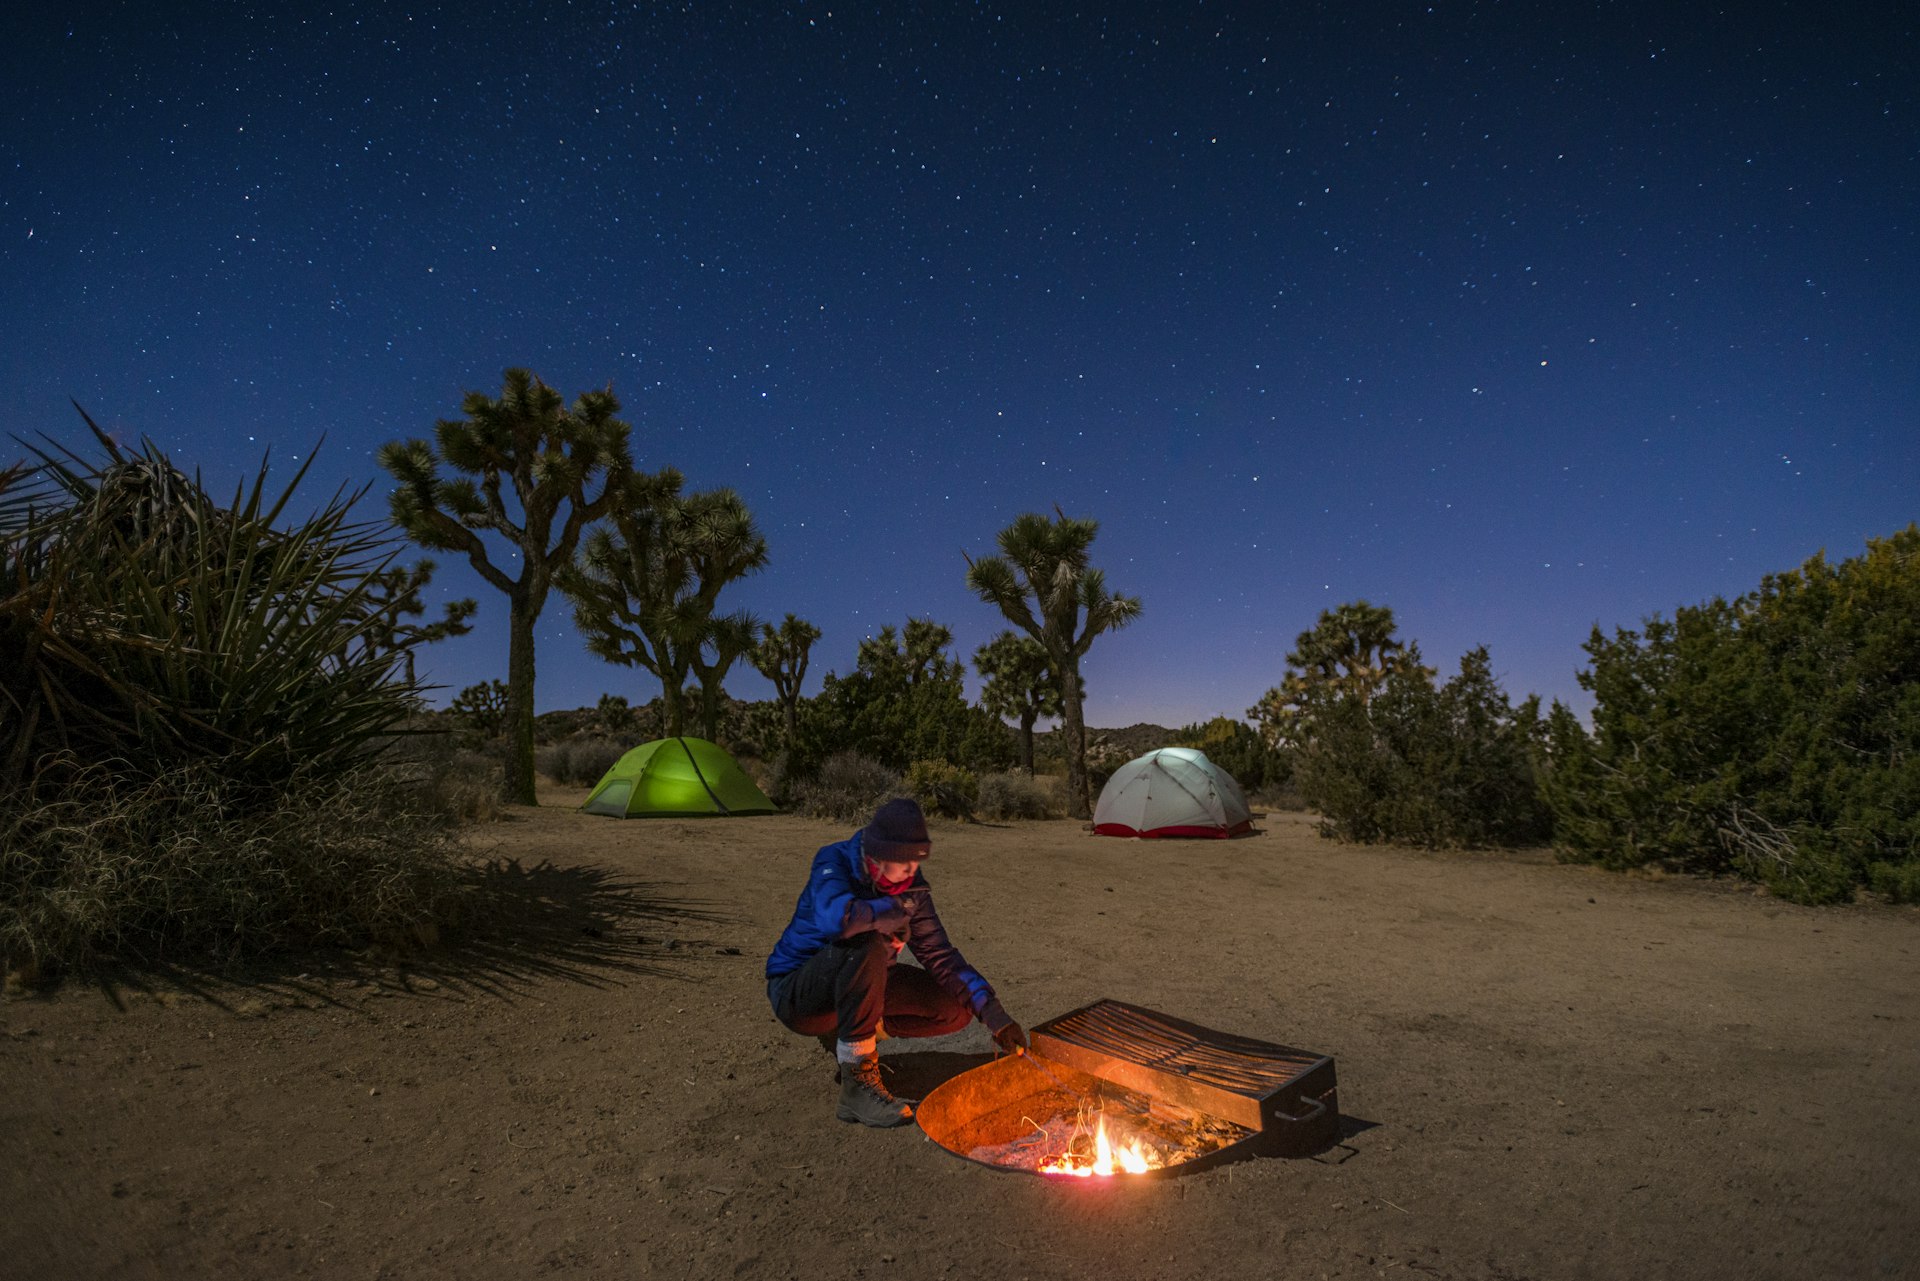 A woman stokes a camp fire near her tent at night in Joshua Tree National Park, California, USA